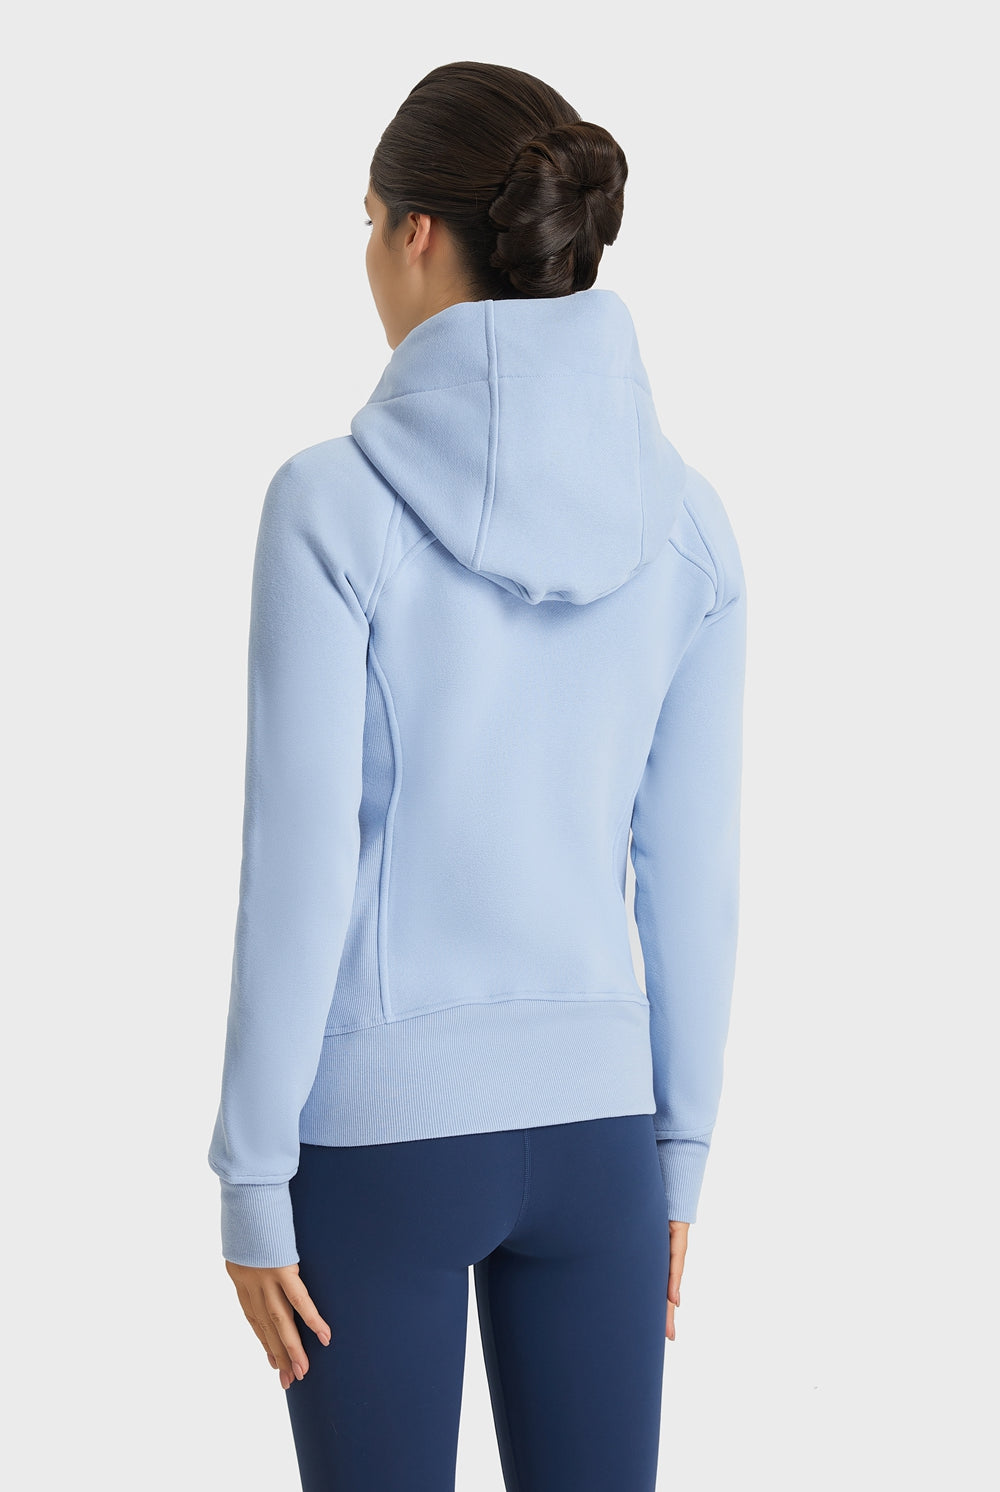 Lavender Progress Not Perfection Zip Up Seam Detail Hooded Sports Jacket activewear